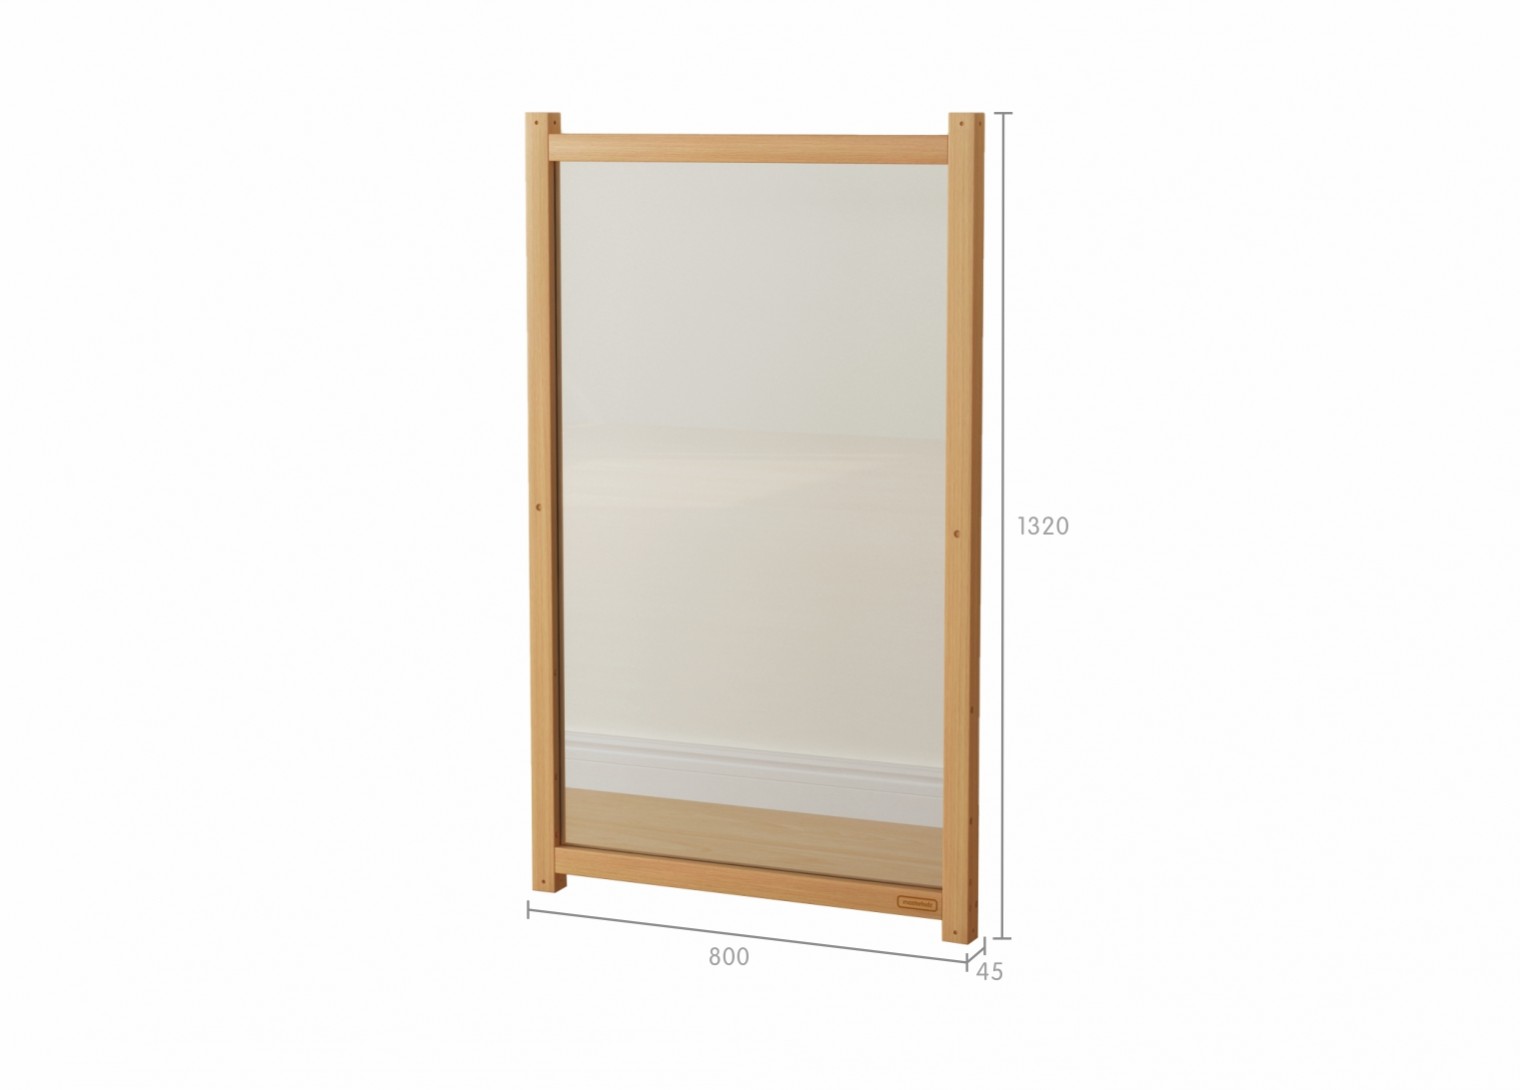 1320H x 800L Panel - Acrylic Painting Wall